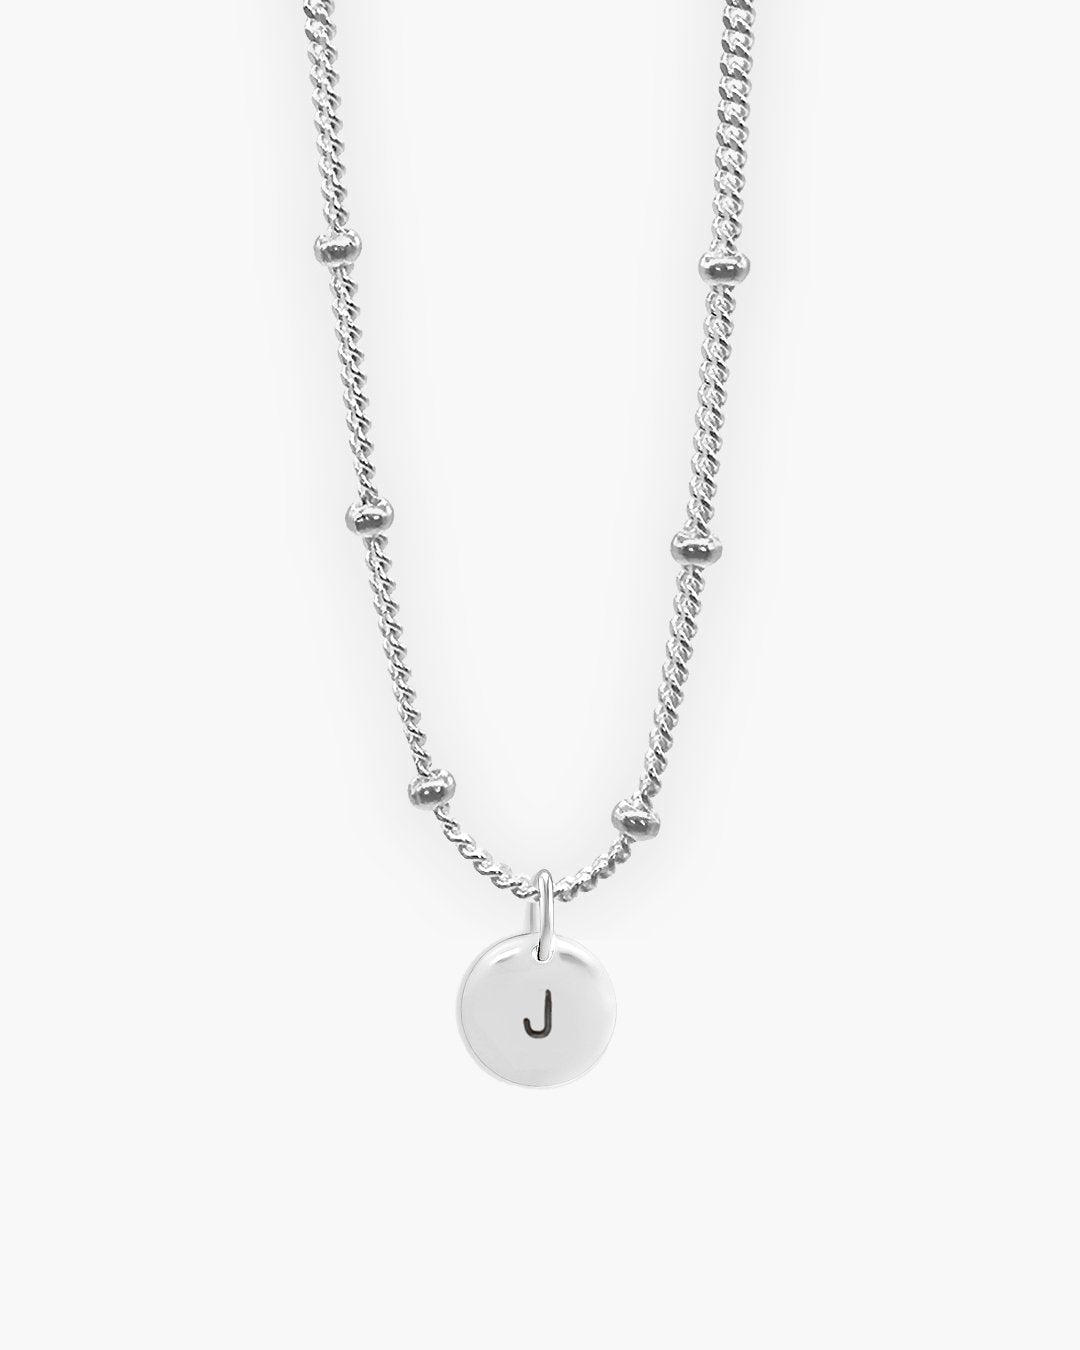 Silver Round Love Letter J Necklace